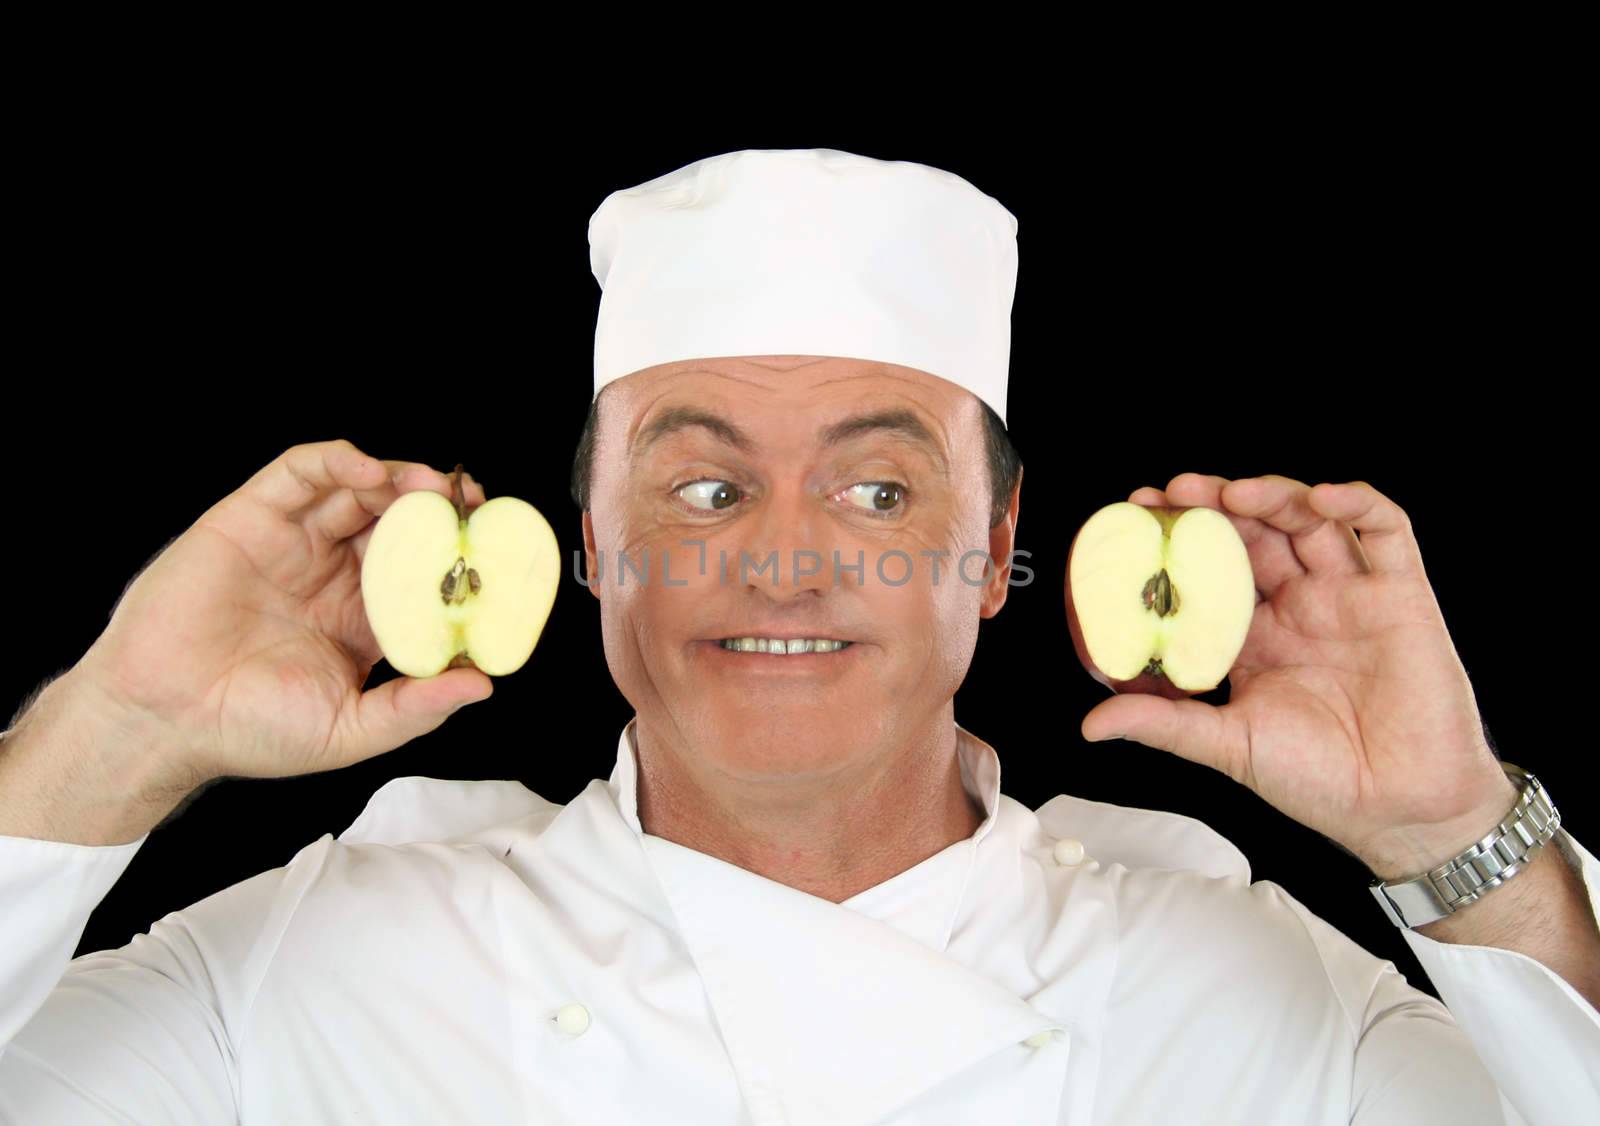 Chef holds two halves of a cut apple.